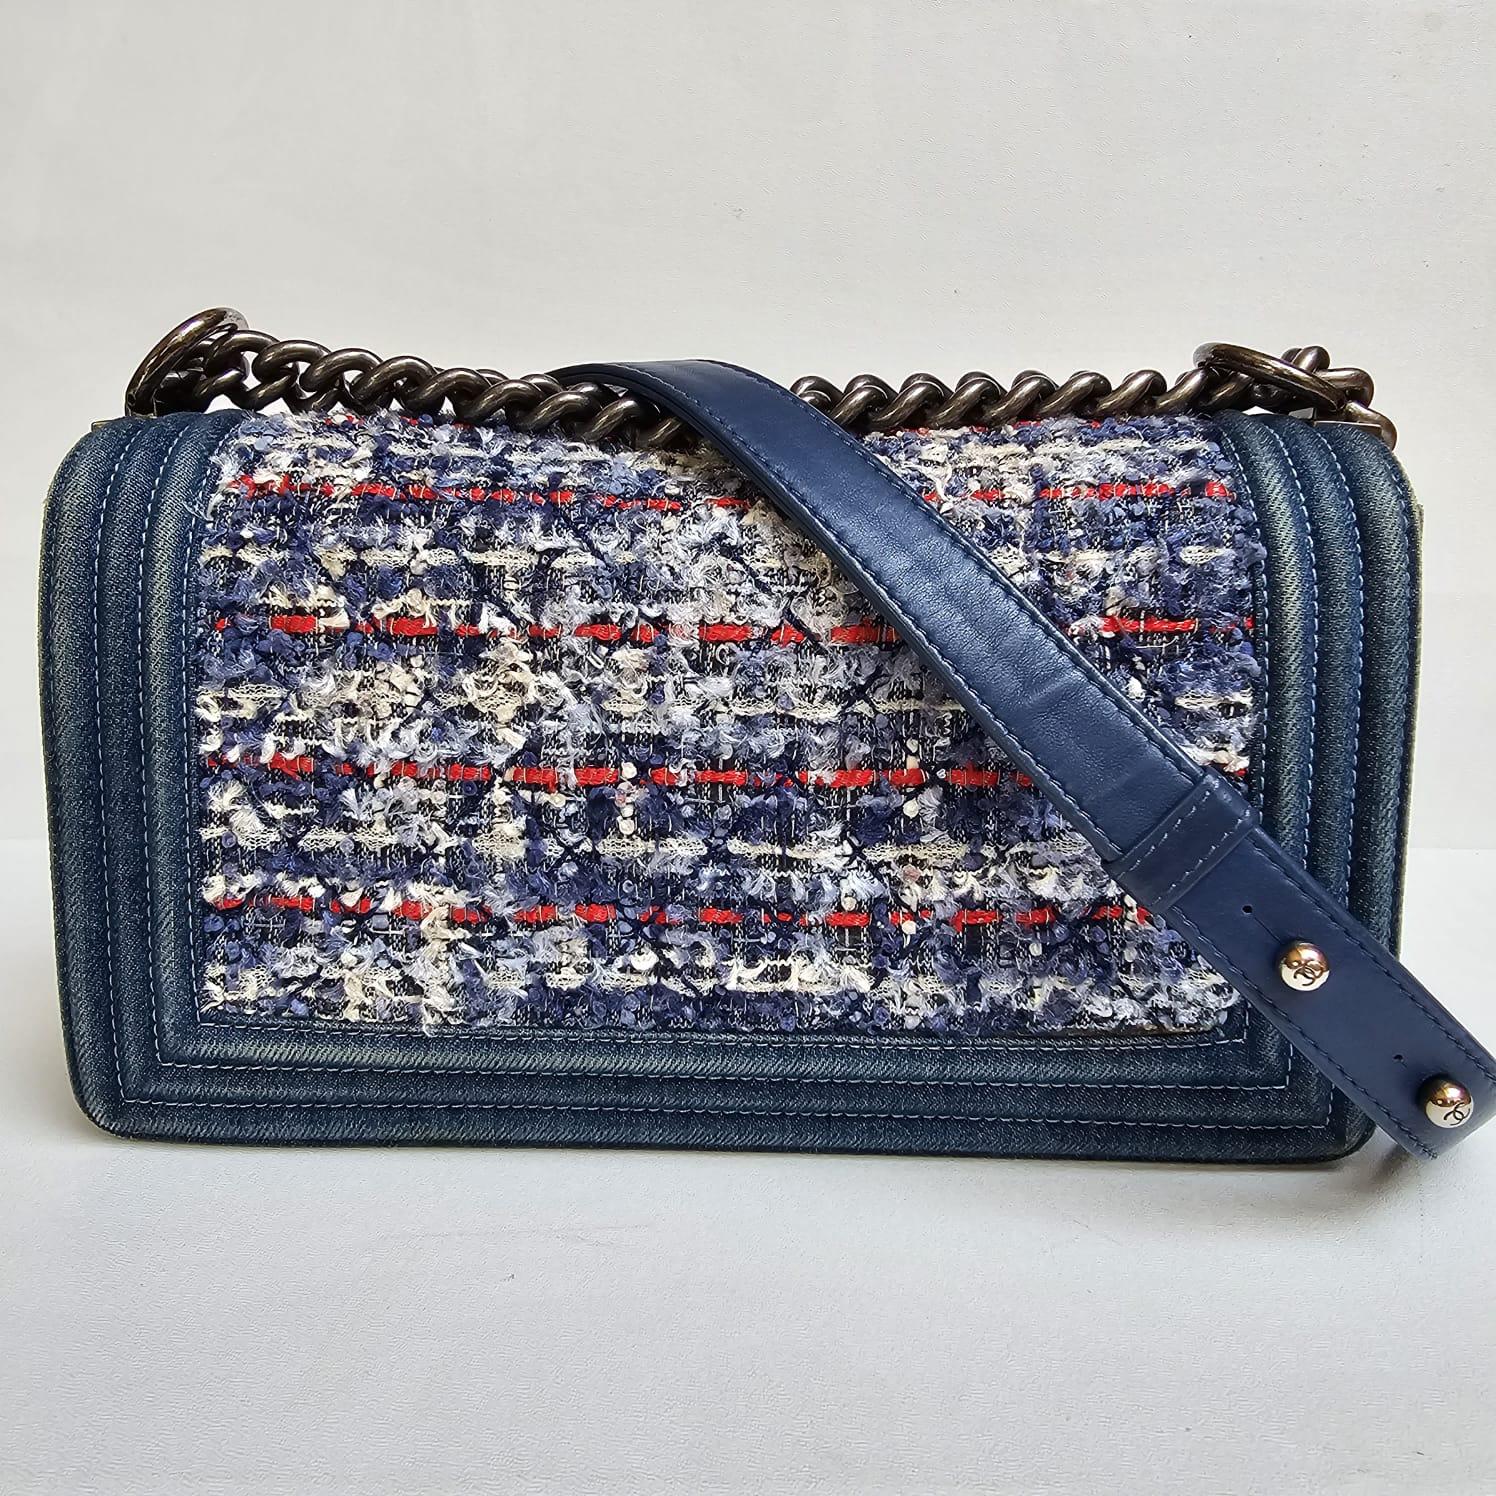 Beautiful boy bag in denim and tweed. A classic bag in great casual color way. Comes with dust bag and holo only. Series #19. Overall still in great condition.